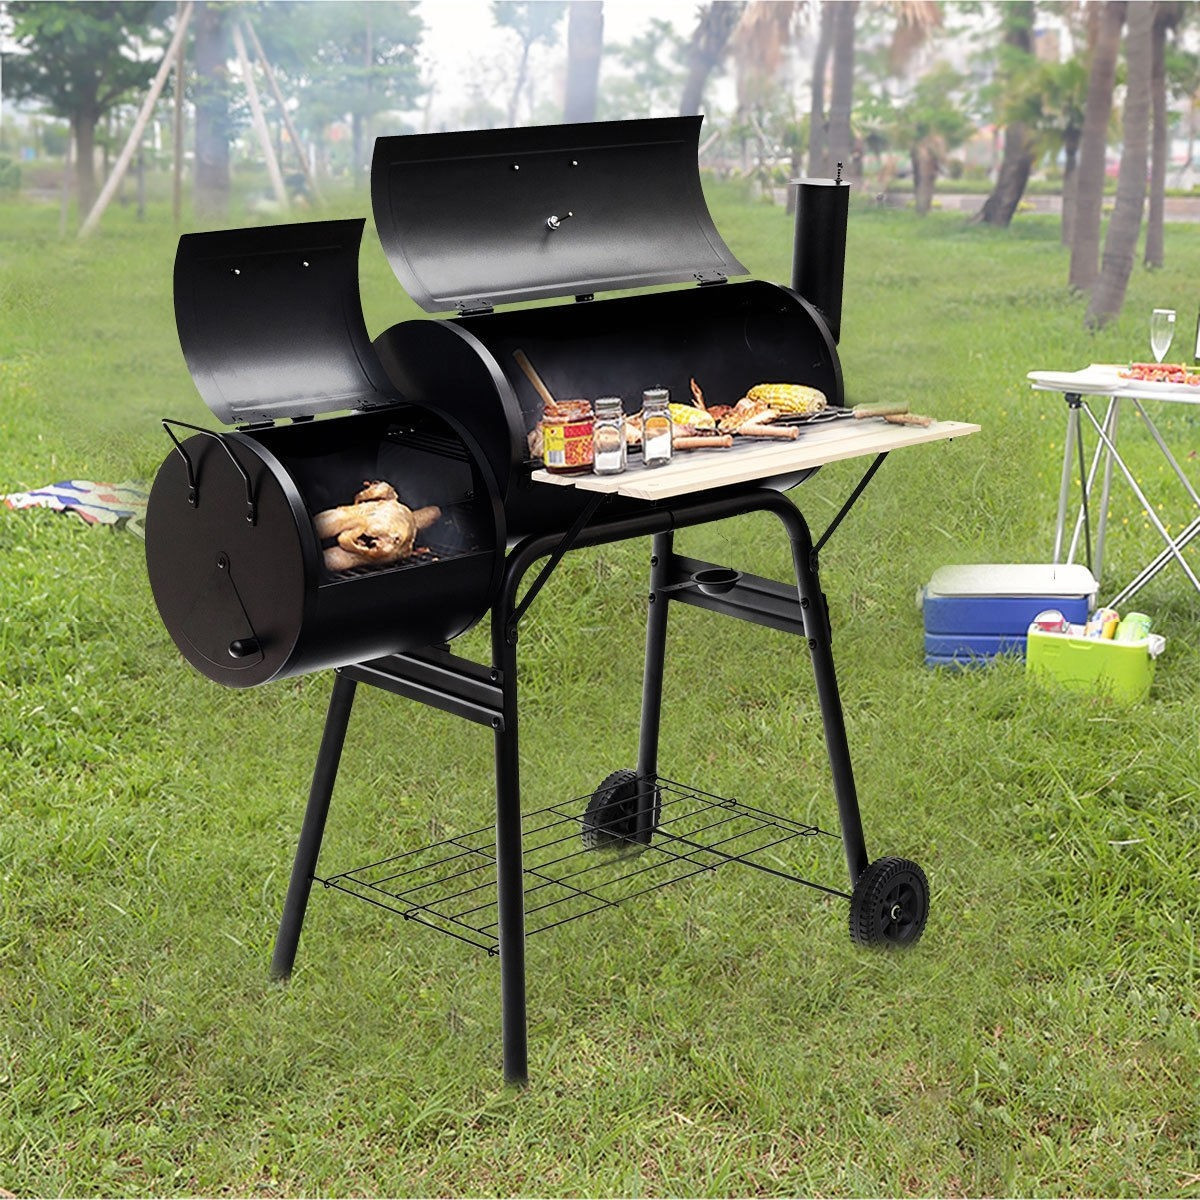 Backyard Barbecue Grill
 Outdoor BBQ Grill Barbecue Pit Patio Cooker Black